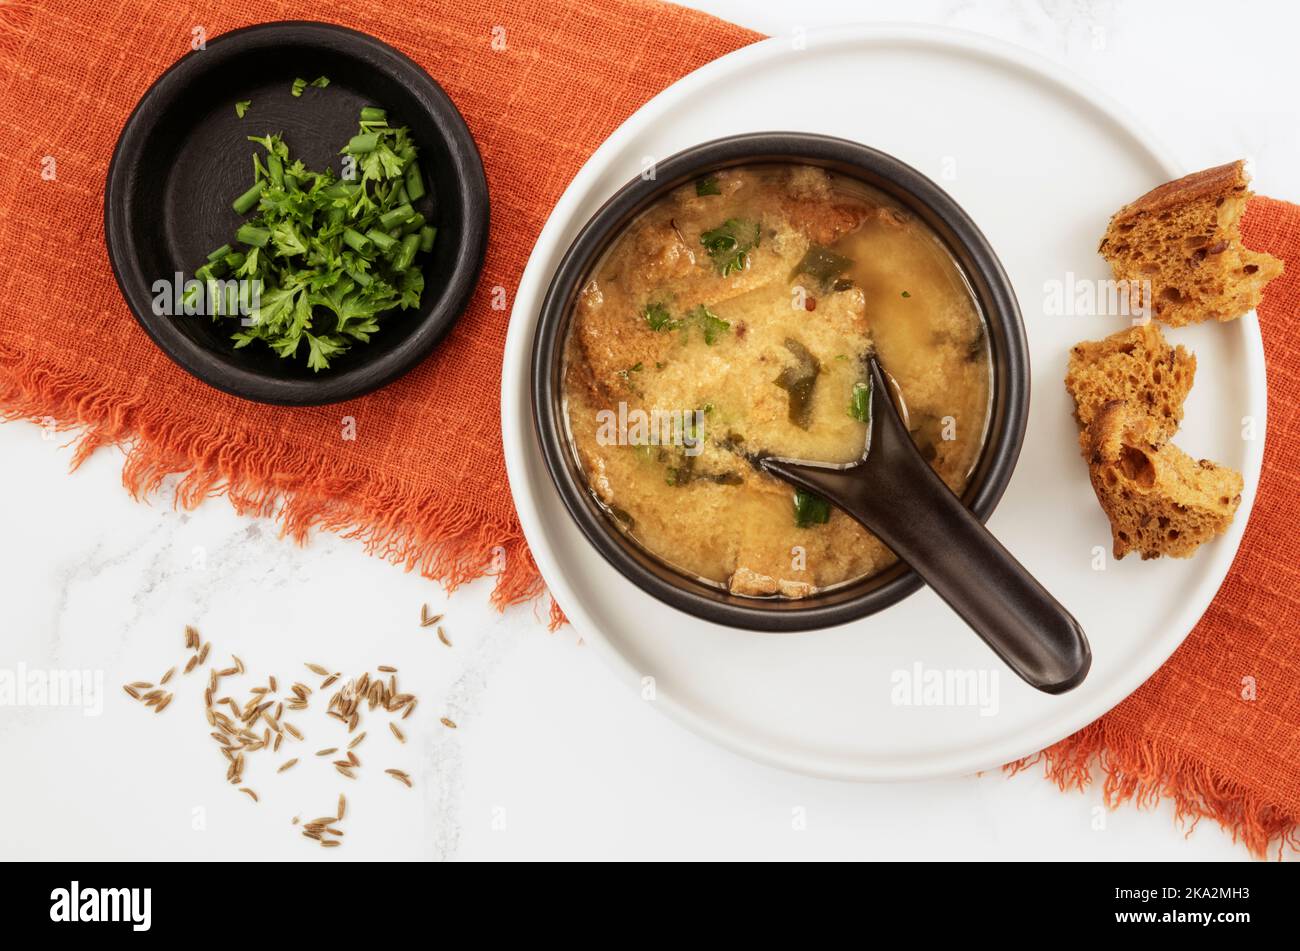 Homemade bread soup made from leftover bread and cumin seeds Stock Photo